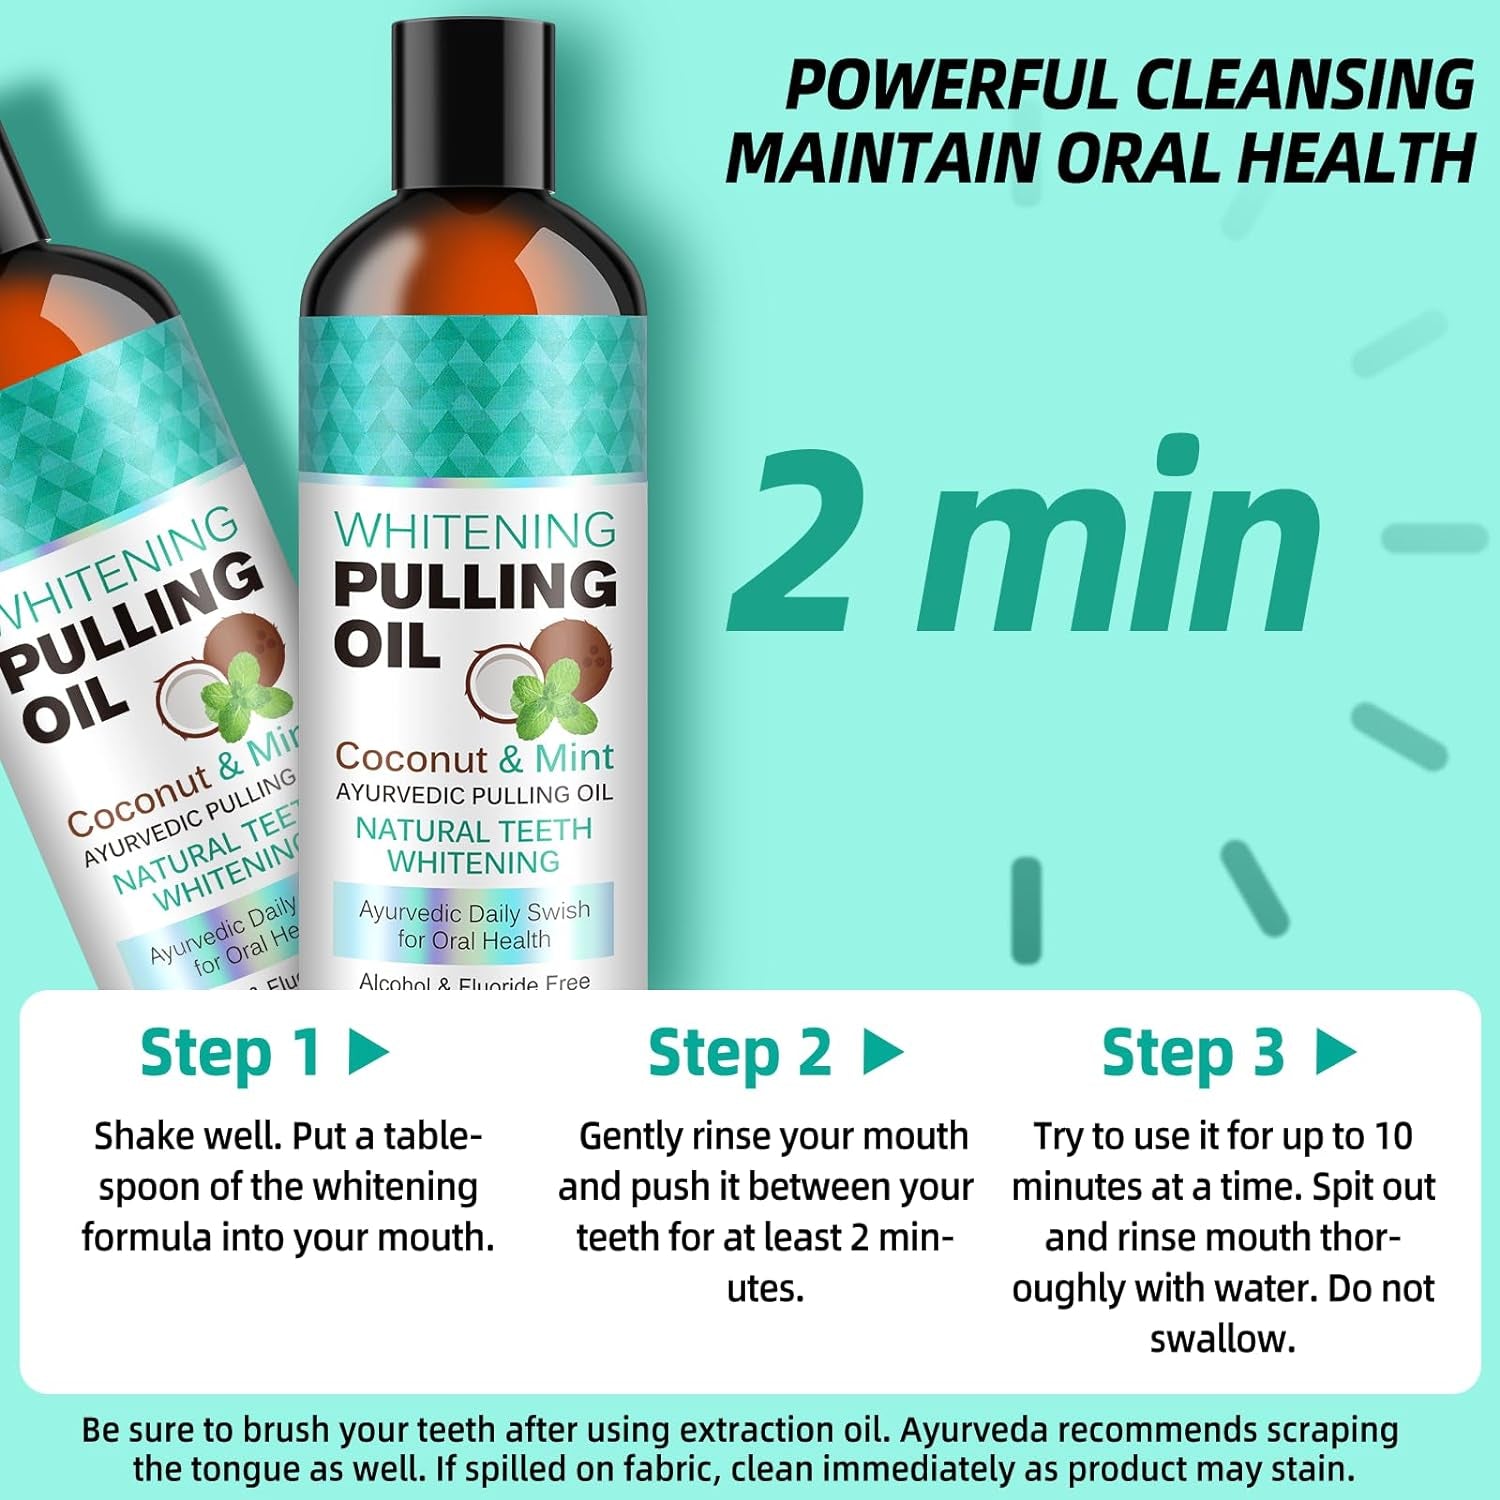 Coconut Pulling Oil for Teeth, Oil Pulling with Tongue Scraper, Natural Oral Care